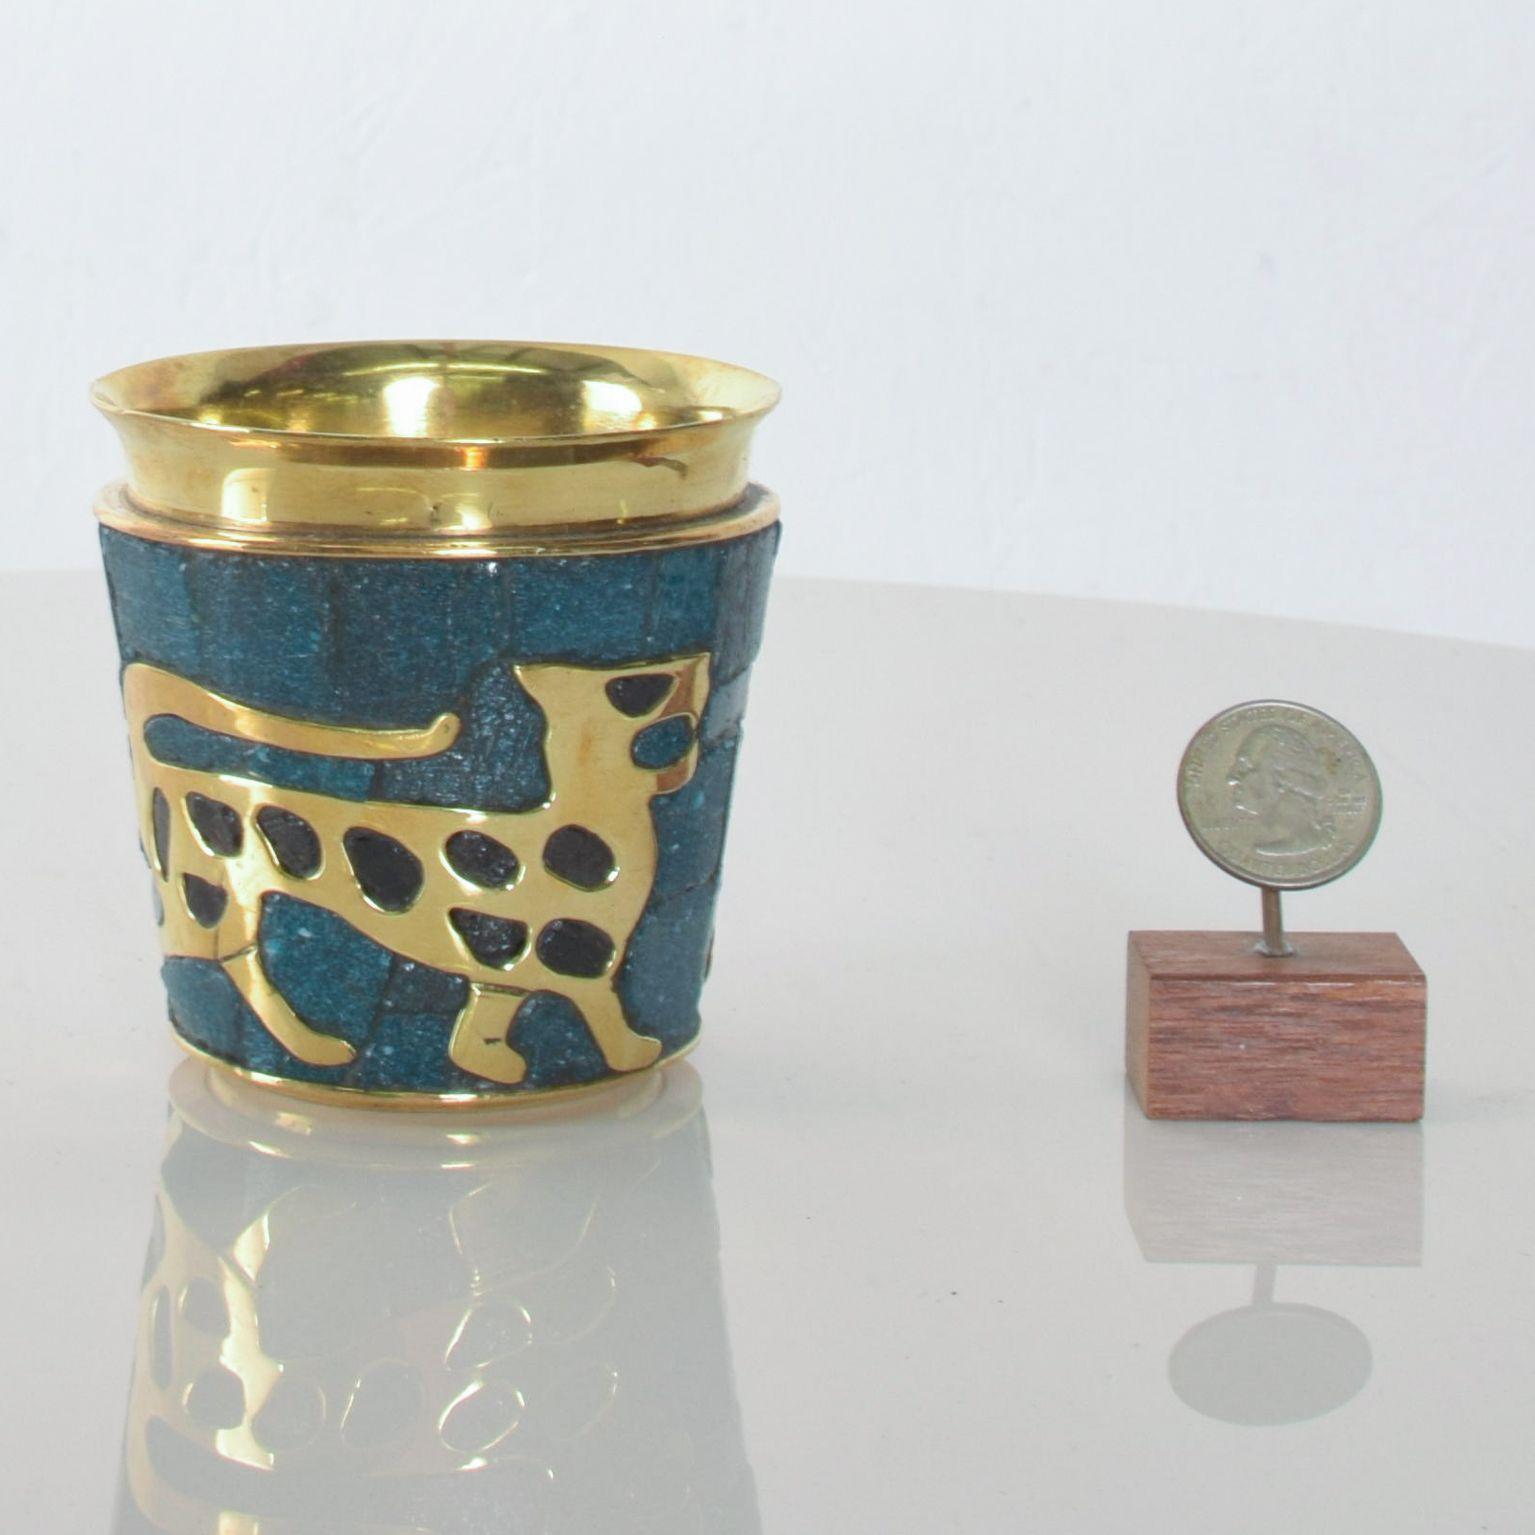 For your pleasure: a Mosaic glass Malachite and brass Tumbler Cup designed by SALVADOR TERAN around 1952. Manufactured by hand in Mexico circa 1960.

Hand wrought brass and glass mosaic in excellent original condition. Maker stamped.

Salvador